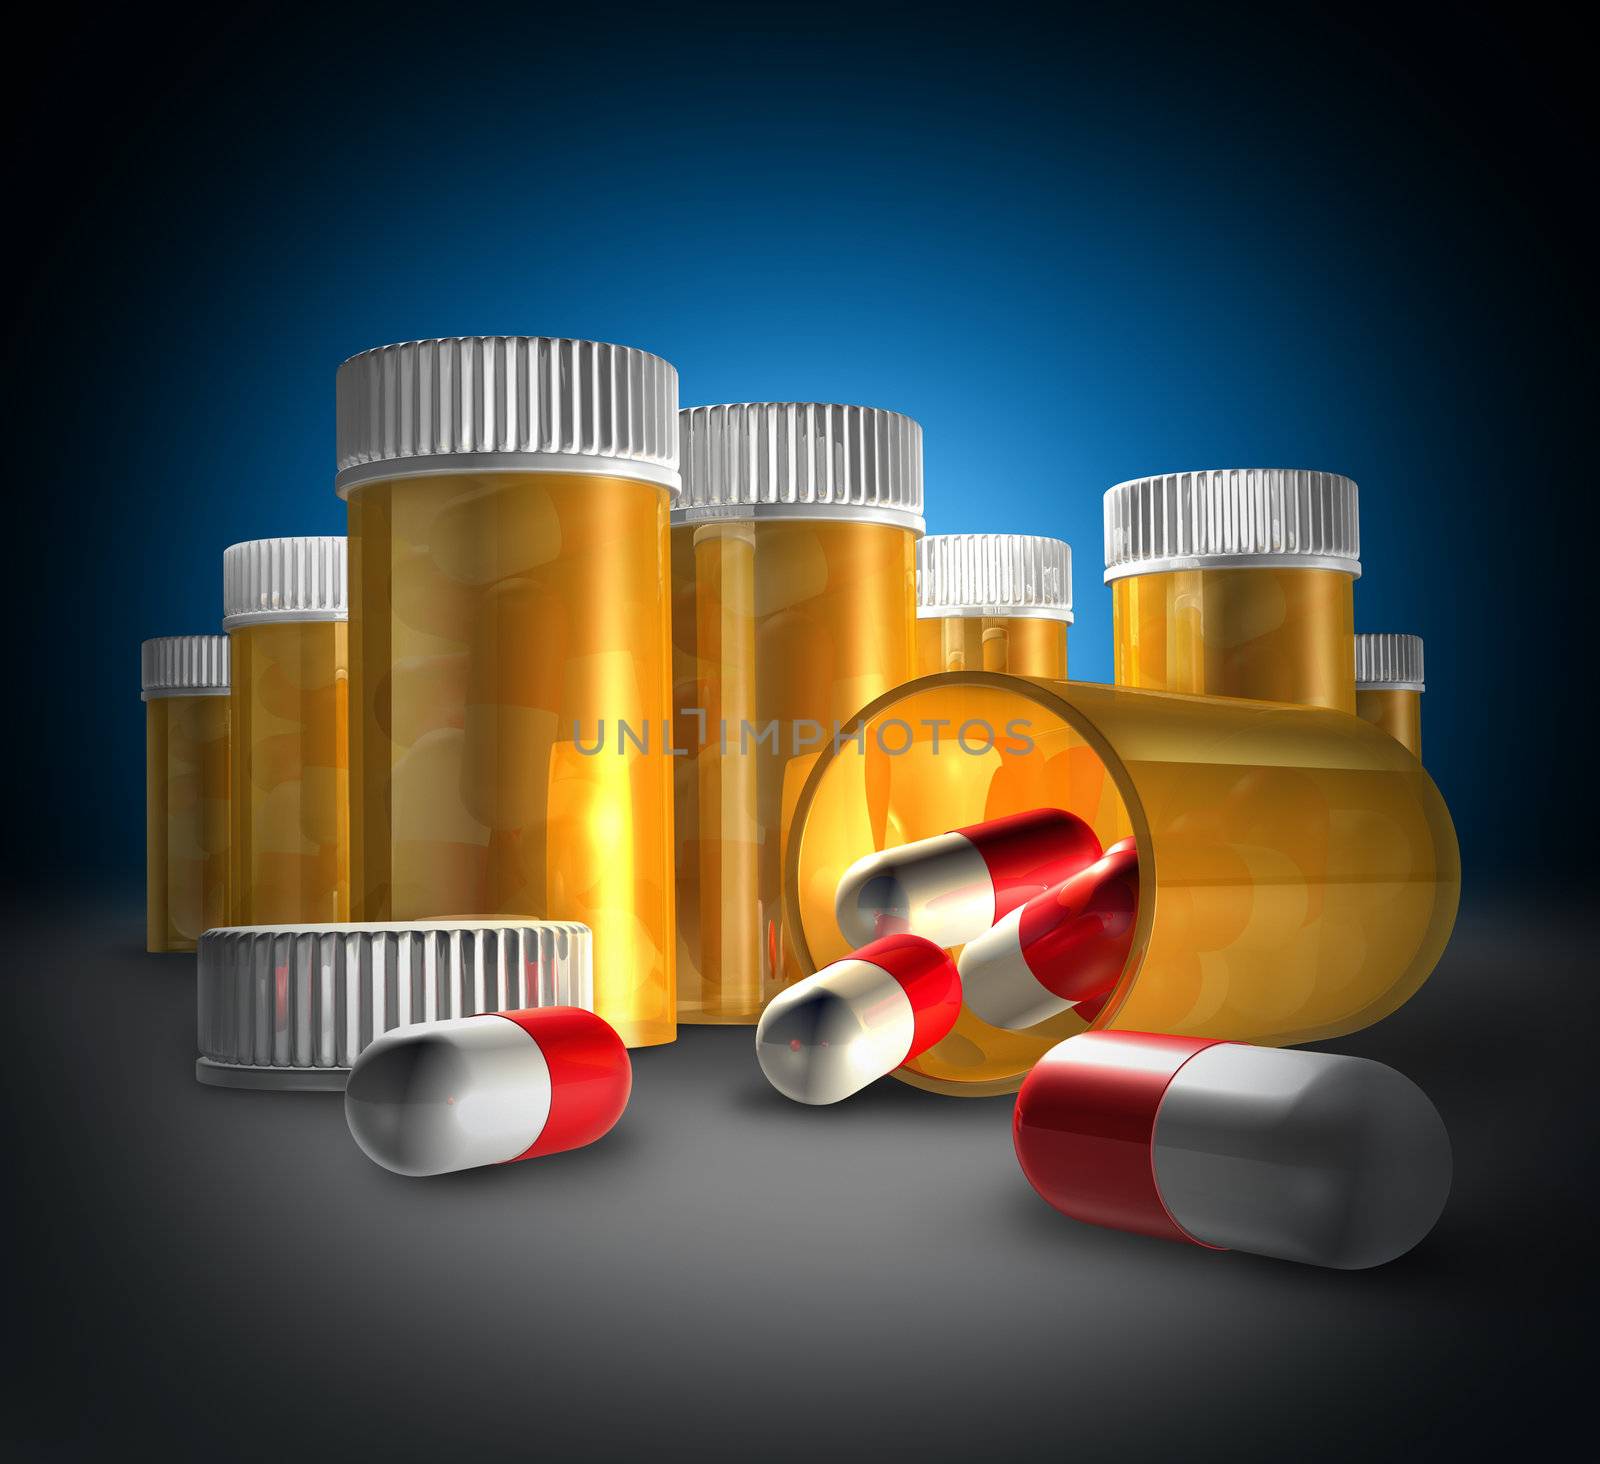 Medicine and medication health care concept with a row of pill bottles with an open bottle and cap as a pharmacy prescription drugs concept  for pain killers and narcotics.